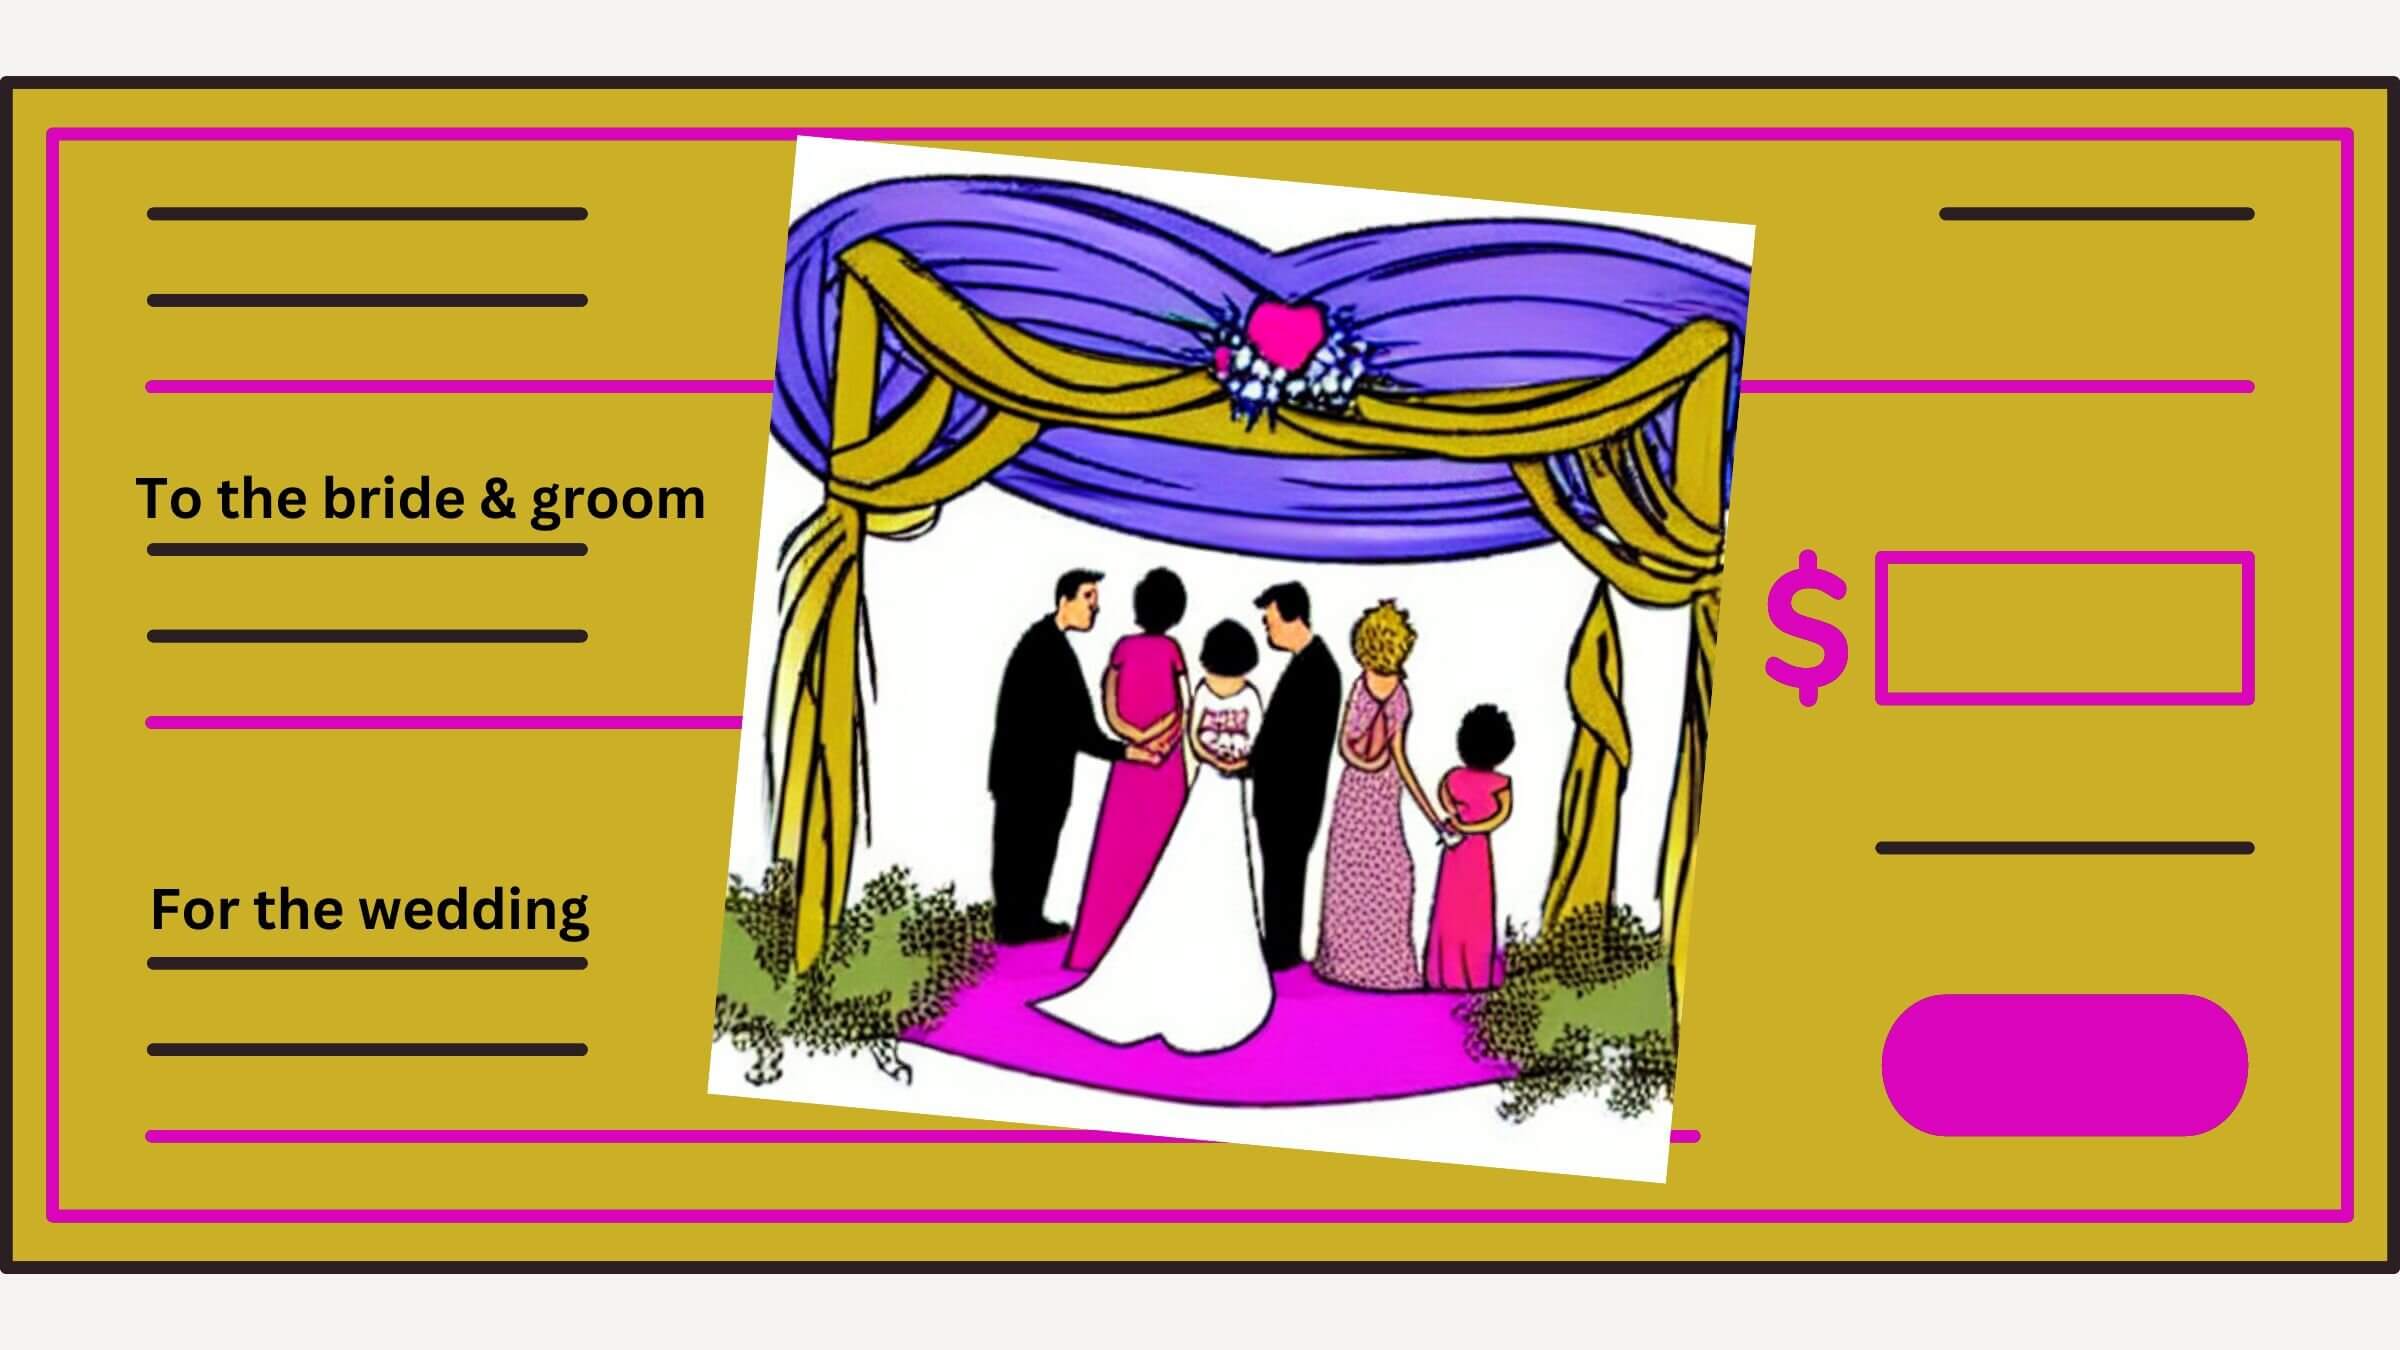 How do you talk to your future in-laws about paying for a wedding?